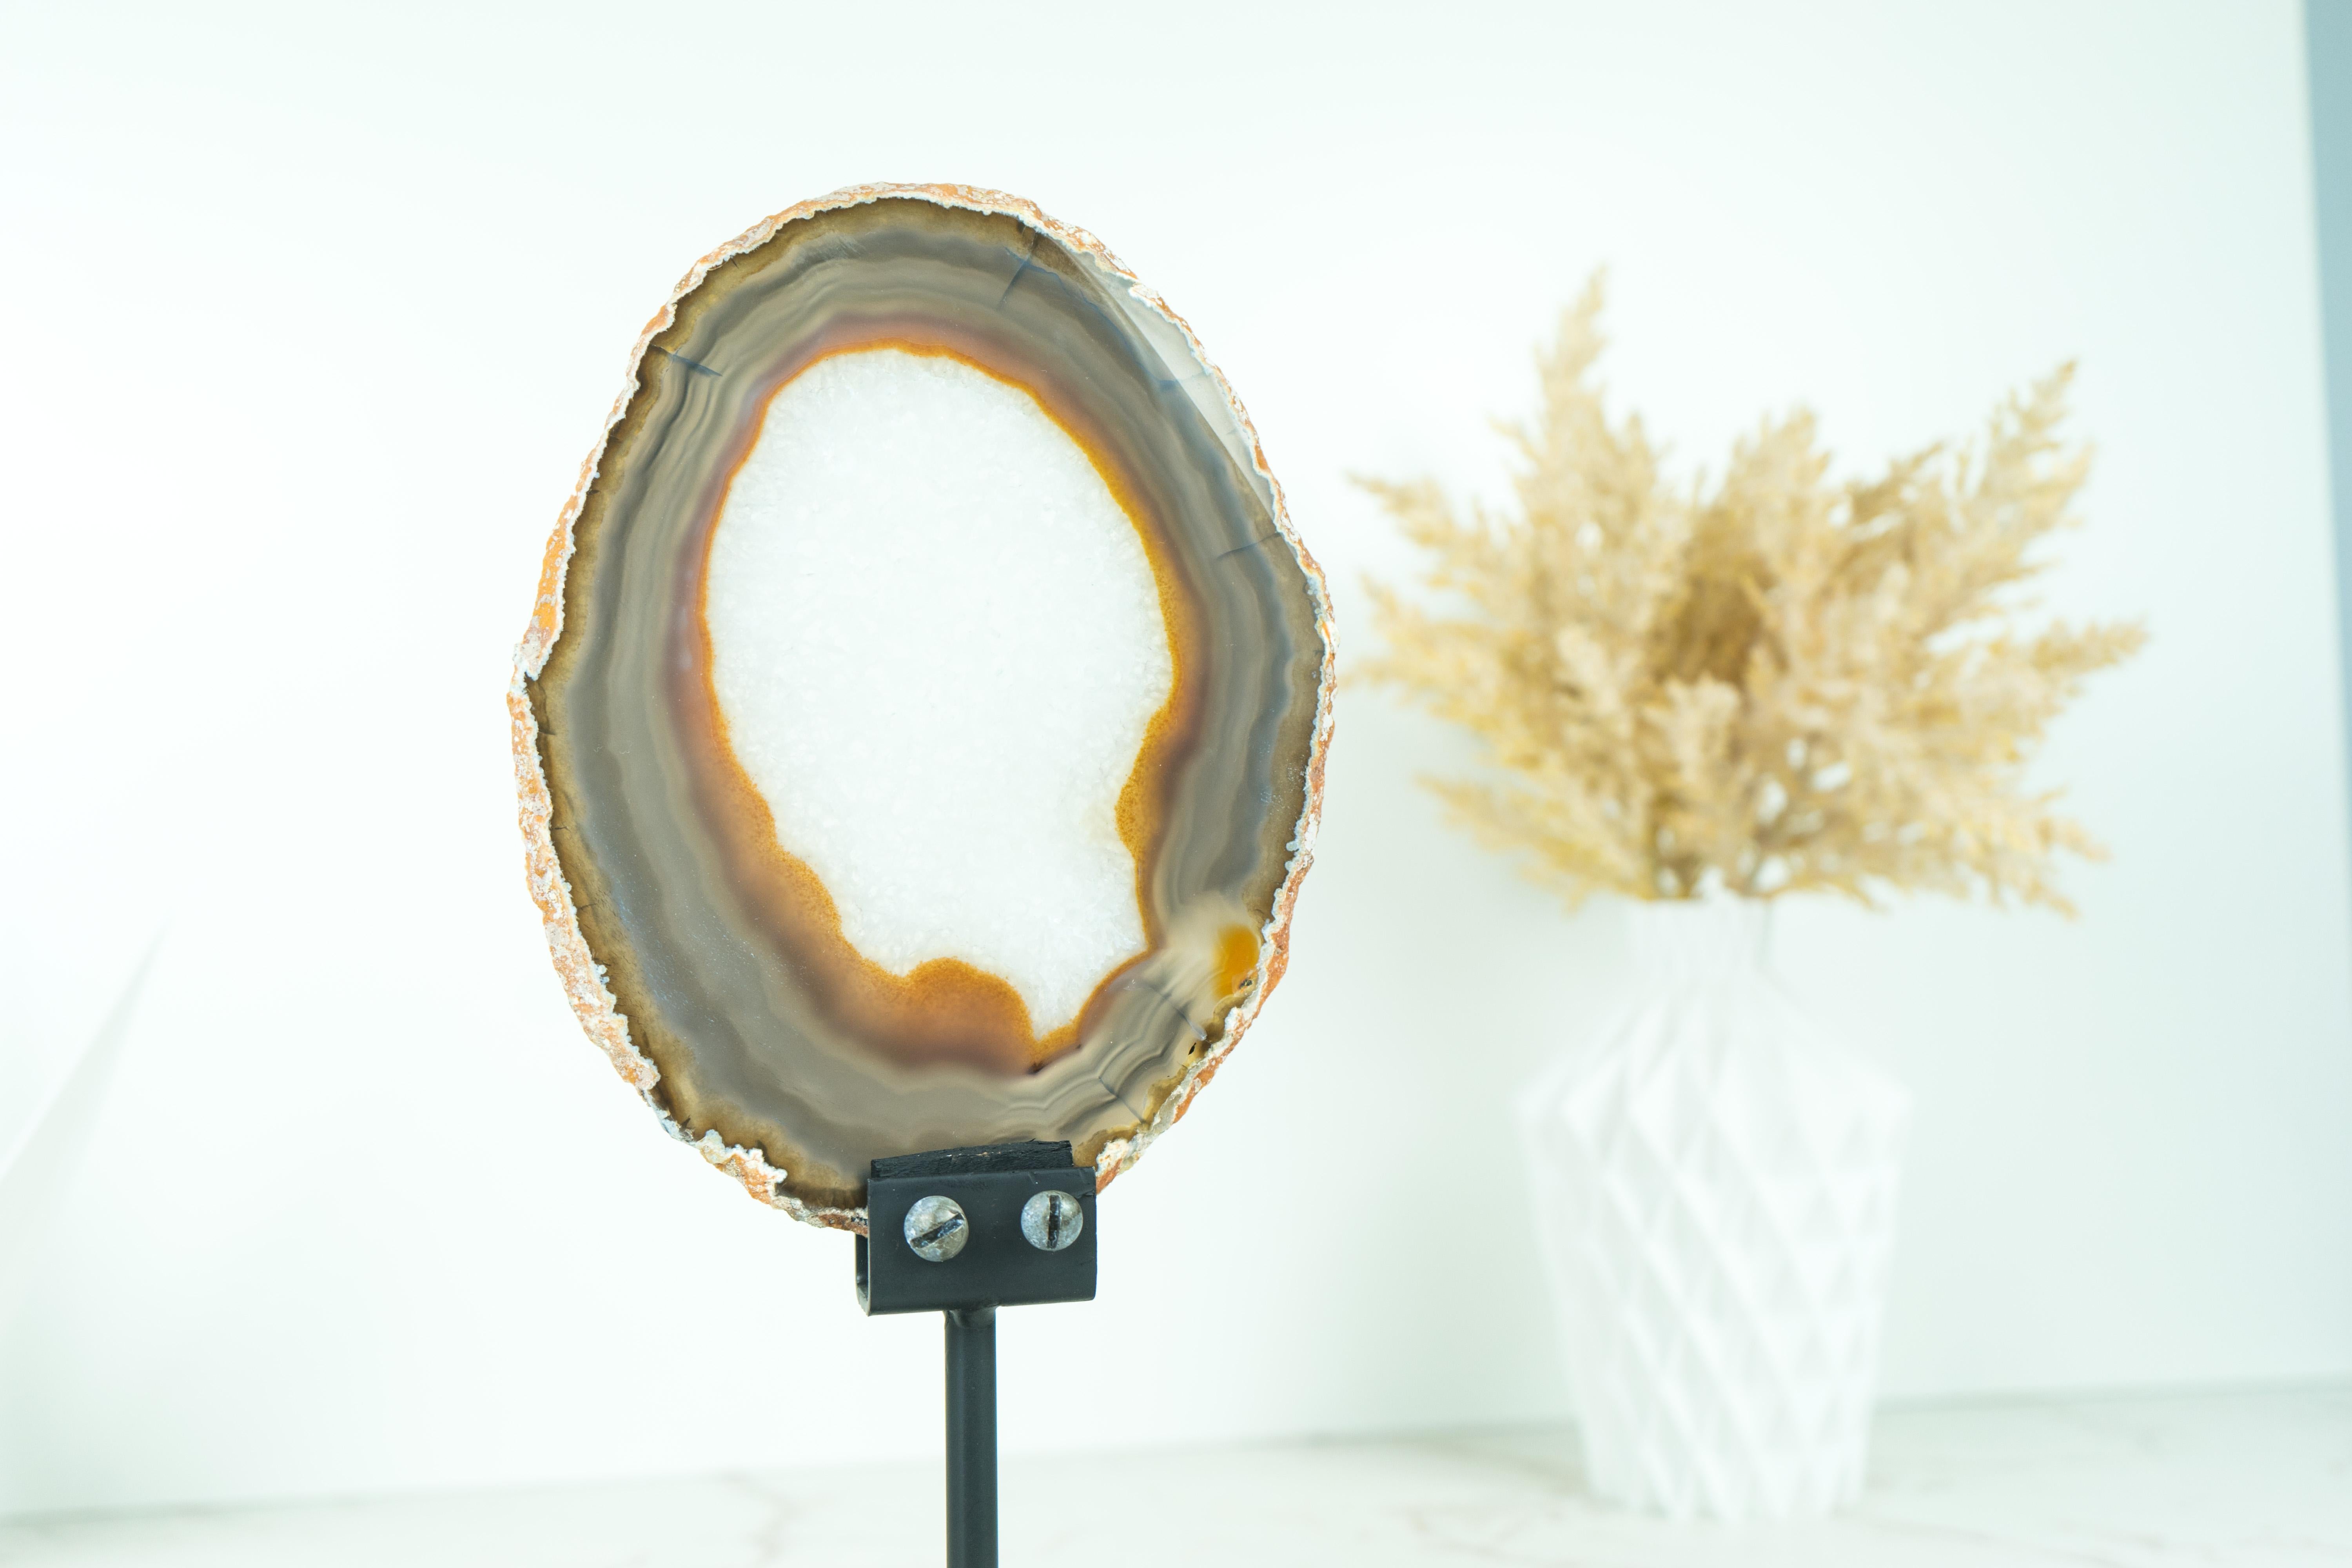 A superb slice of agate, this delicate specimen comes in a custom-made stand so you can fully enjoy it. A Soledade Agate that brings beautiful and intact bandings, where the laces grow in blue, gray, and red colors, and a mix of Circular and